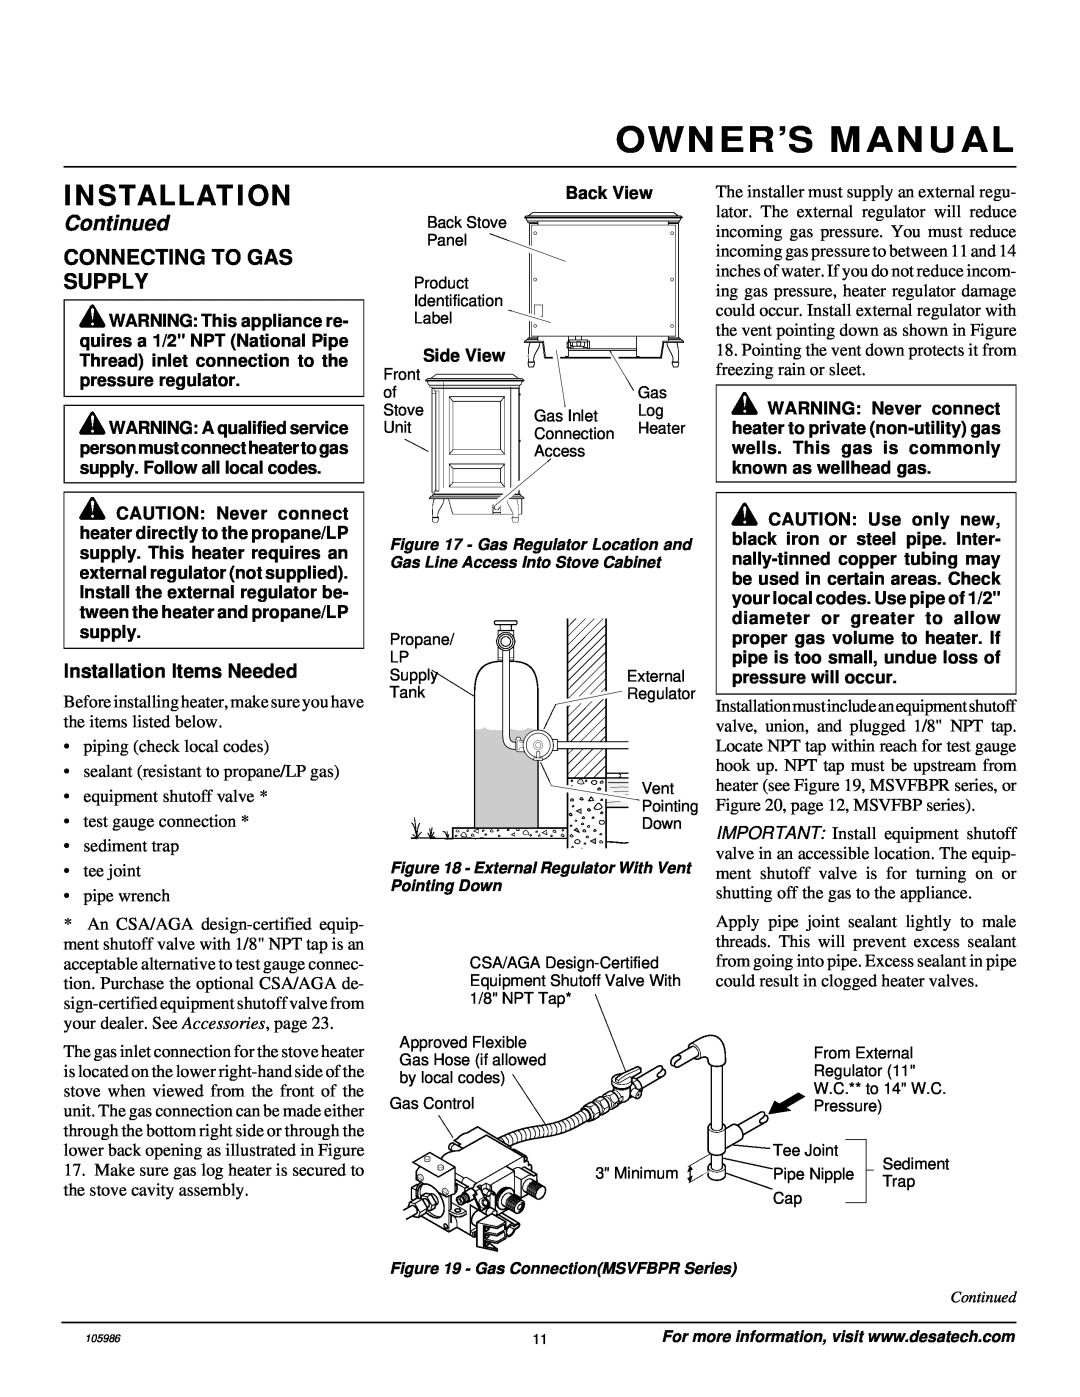 Desa MSVFBP installation manual Connecting To Gas Supply, Installation Items Needed, Continued 